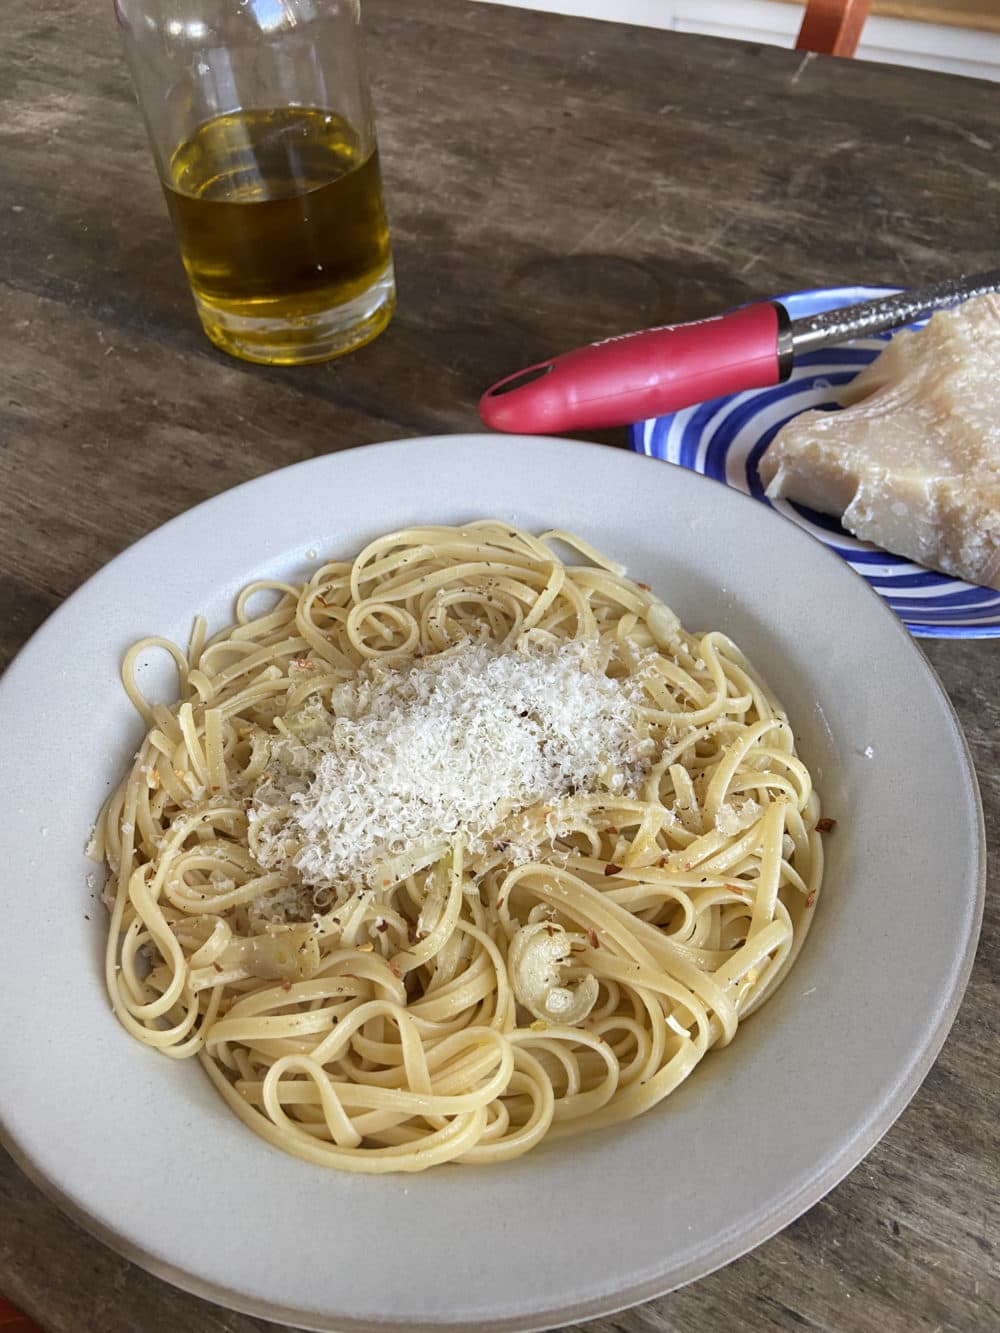 Aglio e olio (garlic and oil) linguine with parmesan cheese. (Kathy Gunst/Here & Now)